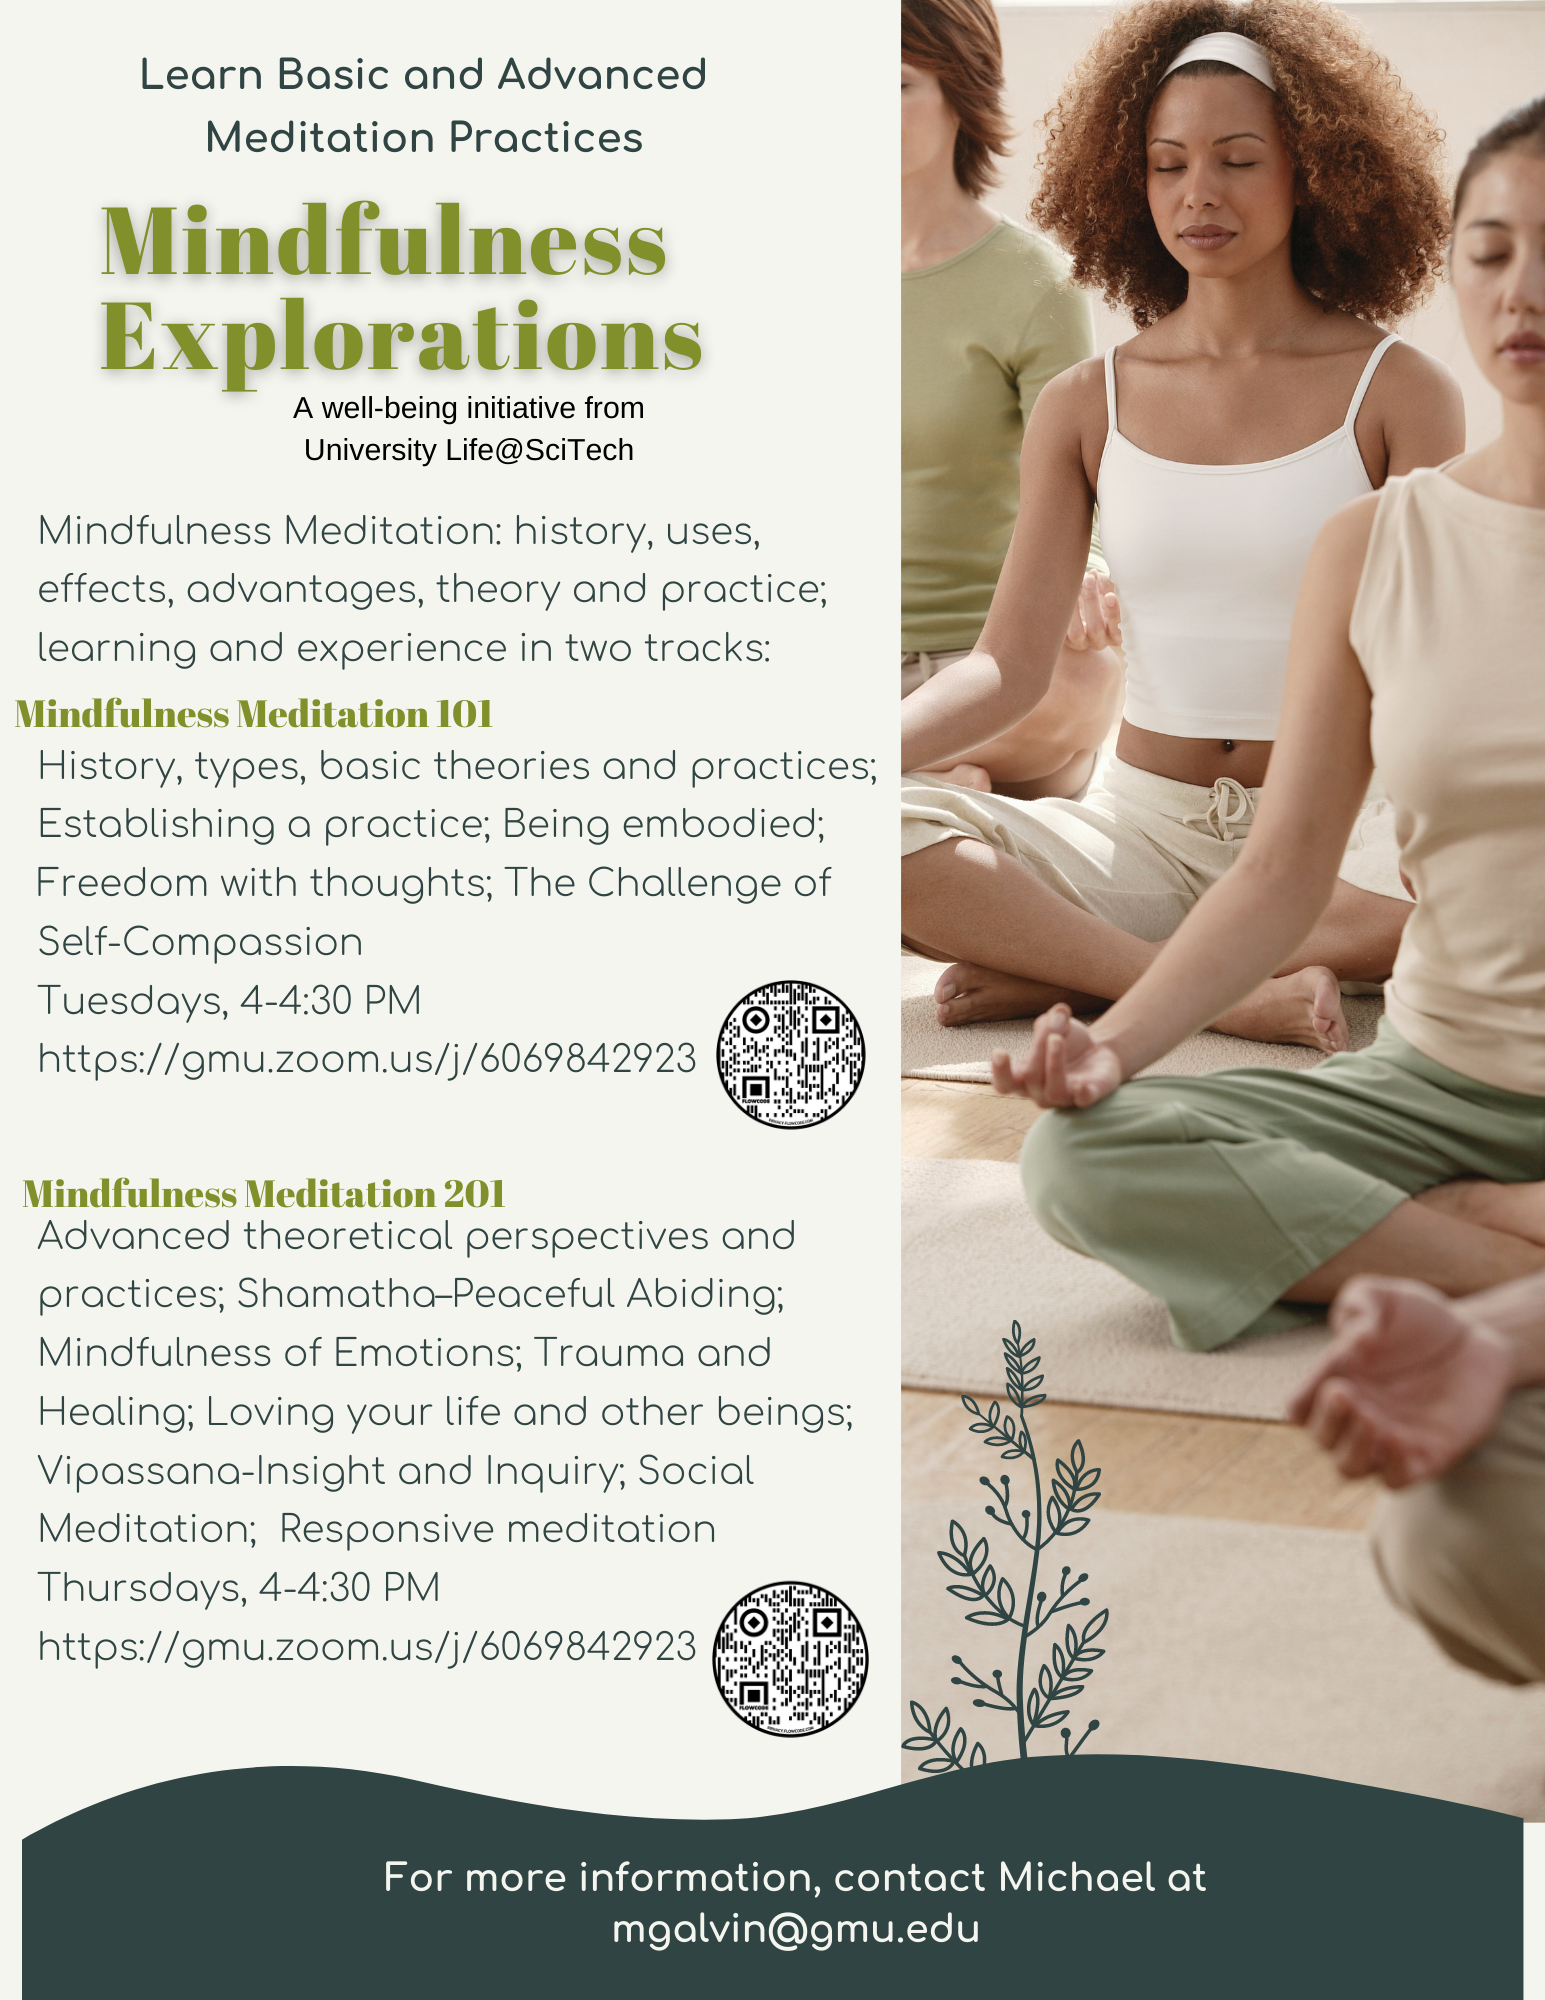 Mindfulness Meditation: history, uses, effects, advantages, theory and practice; learning and experience in two tracks:  History, types, basic theories and practices; Establishing a practice; Being embodied; Freedom with thoughts; The Challenge of Self-Compassion Tuesdays, 4-4:30 PM https://gmu.zoom.us/j/6069842923   Advanced theoretical perspectives and practices; Shamatha–Peaceful Abiding; Mindfulness of Emotions; Trauma and Healing; Loving your life and other beings; Vipassana-Insight and Inquiry; Social Meditation;  Responsive meditation Thursdays, 4-4:30 PM https://gmu.zoom.us/j/6069842923